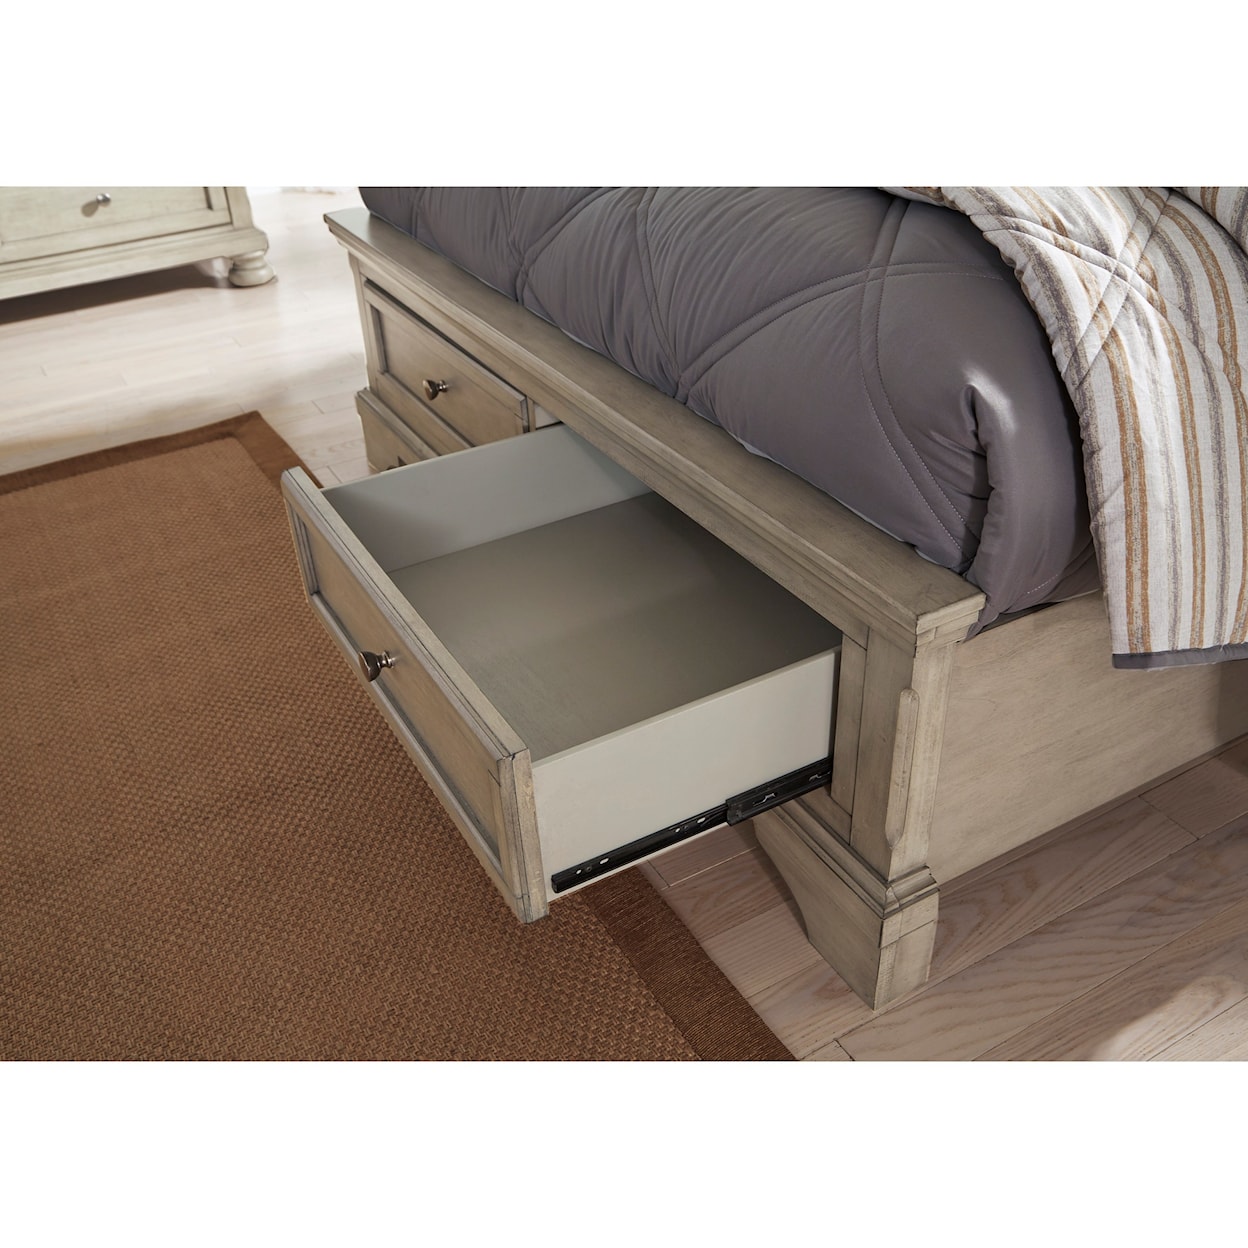 Signature Design by Ashley Furniture Lettner Full Sleigh Storage Bed